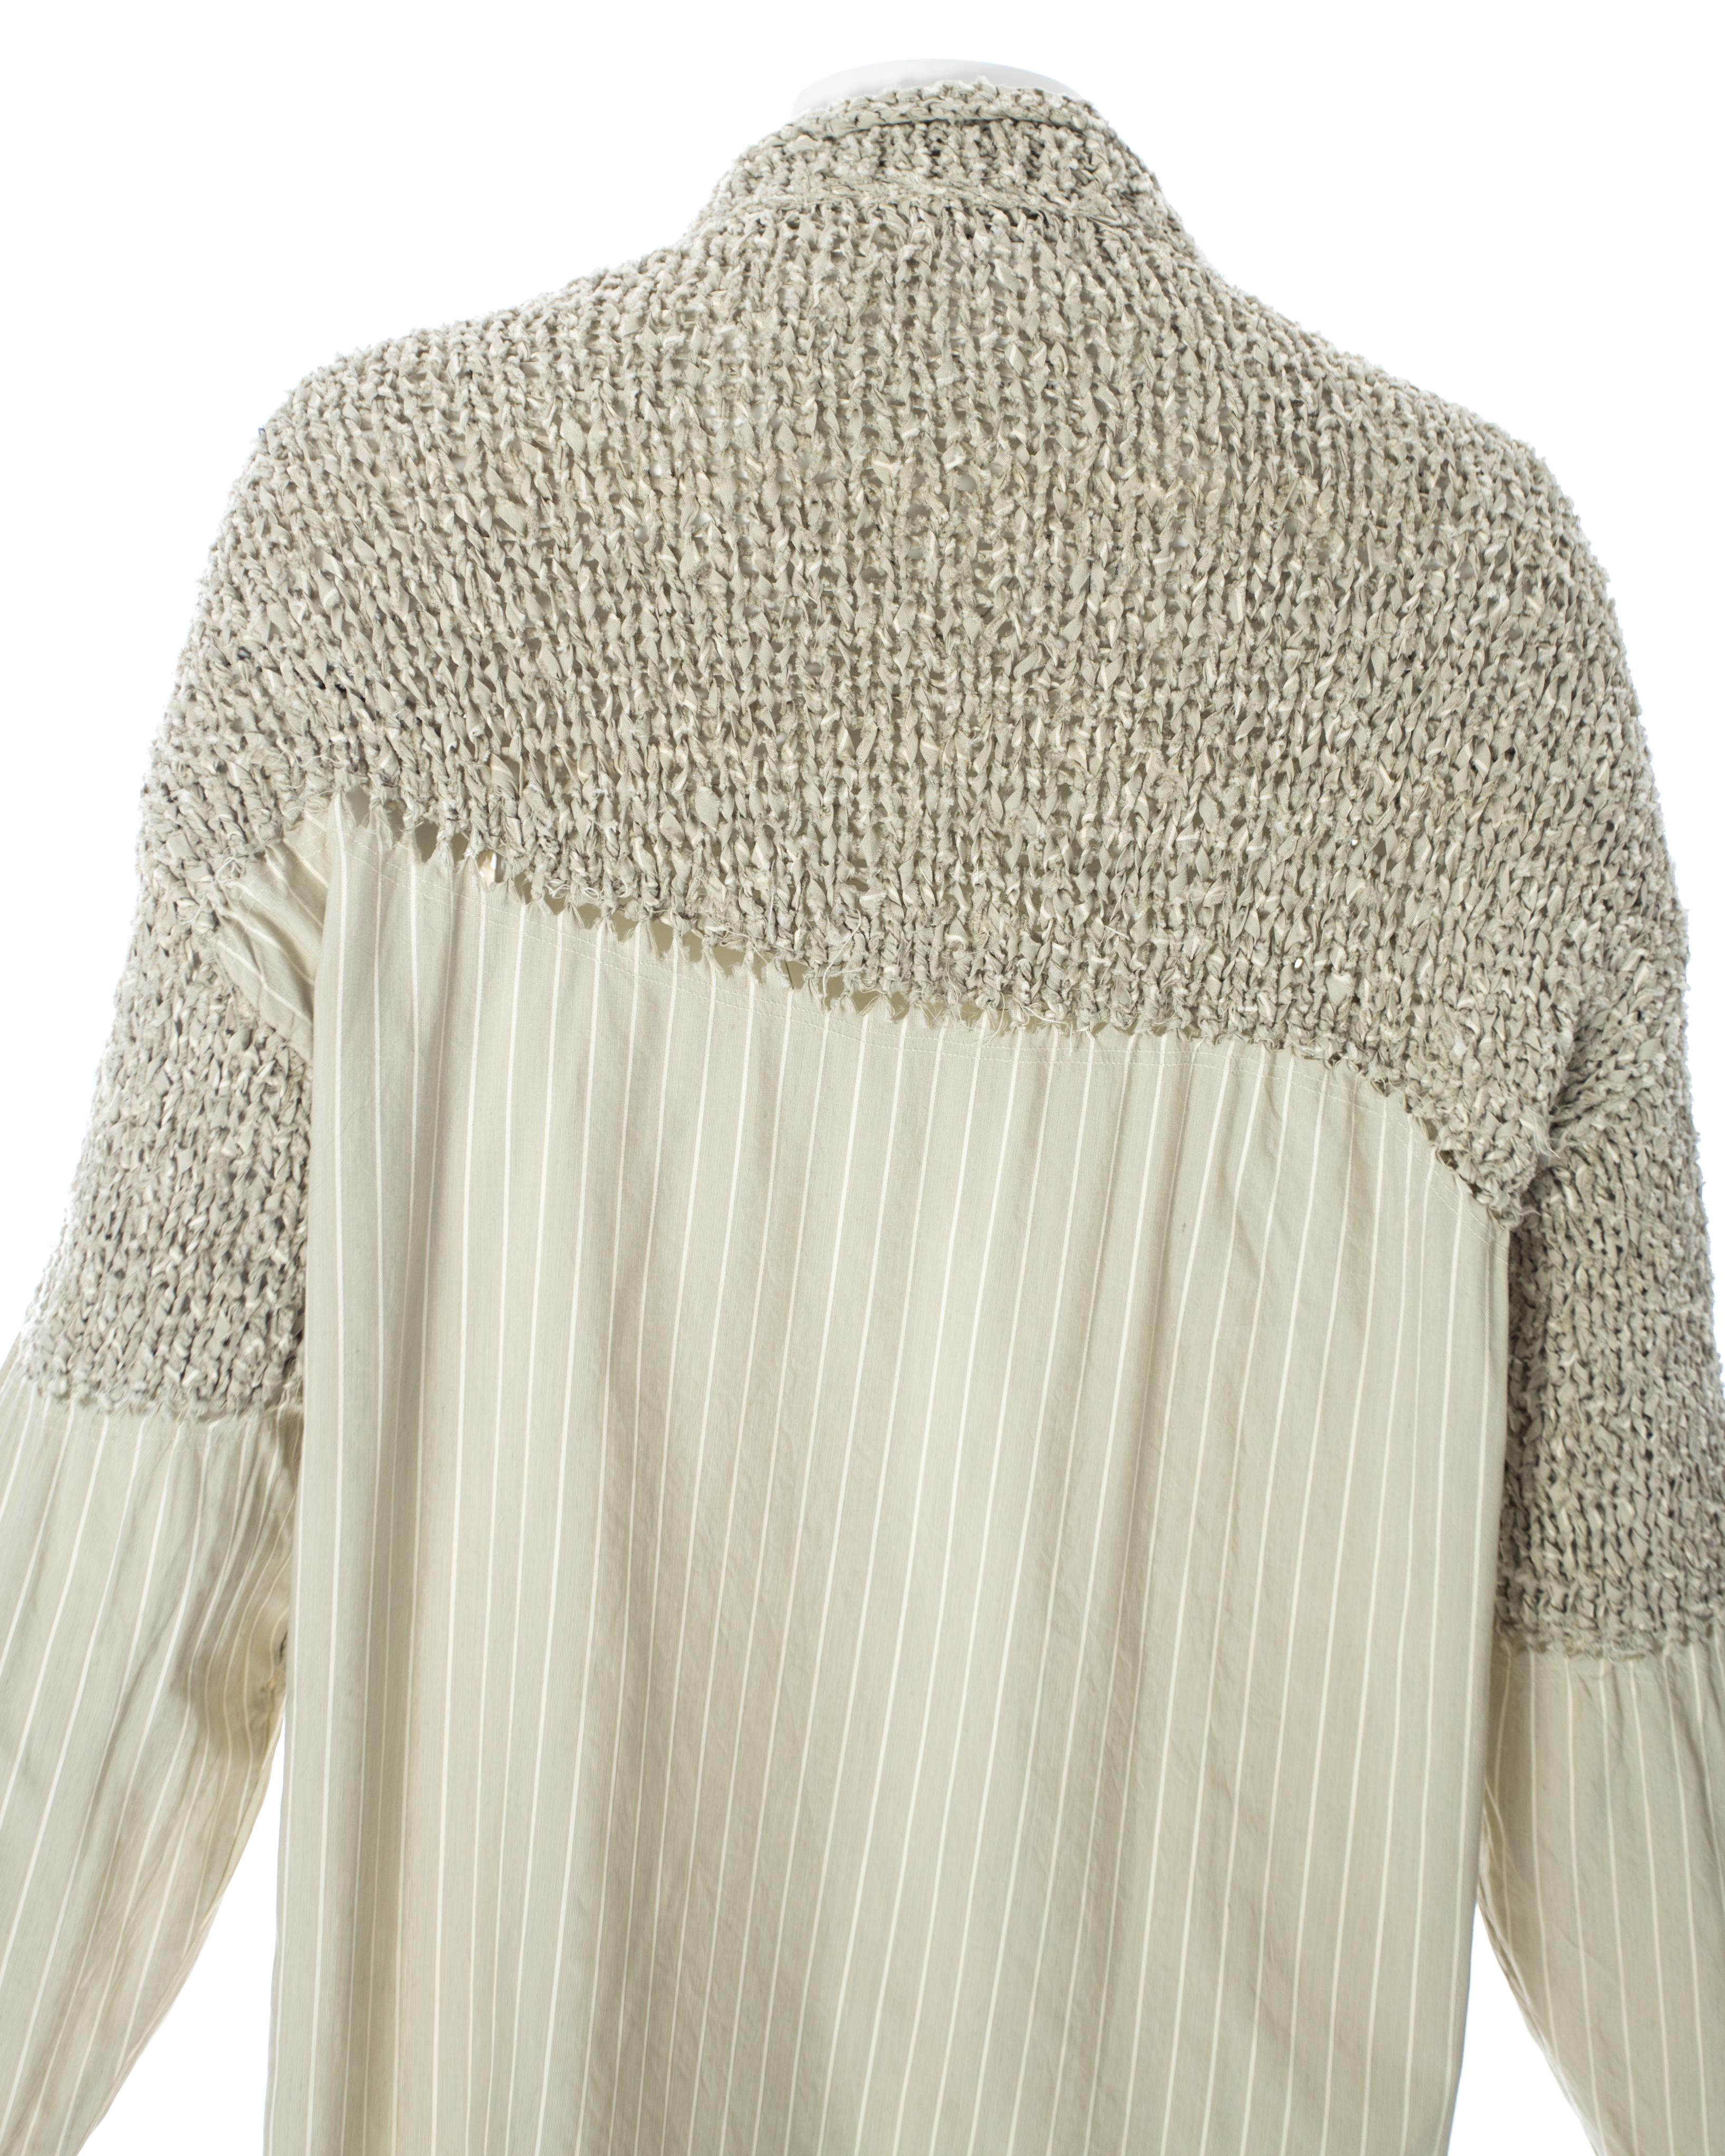 Beige Matsuda knitted sweater with attached striped shirt, circa 1990 For Sale